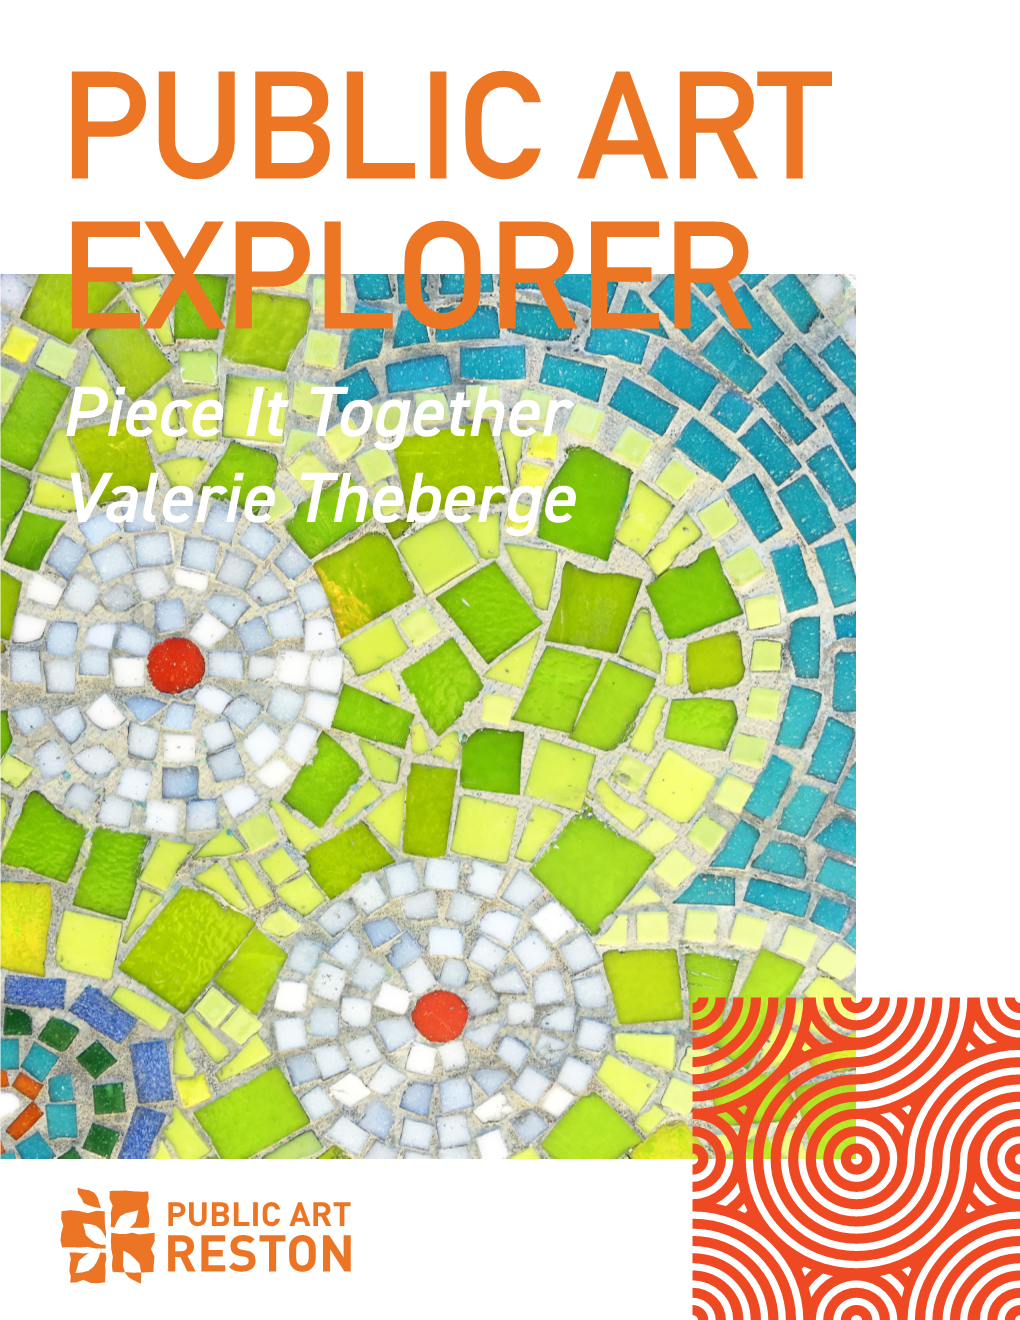 Piece It Together Valerie Theberge PIECE IT TOGETHER VALERIE THEBERGE (B